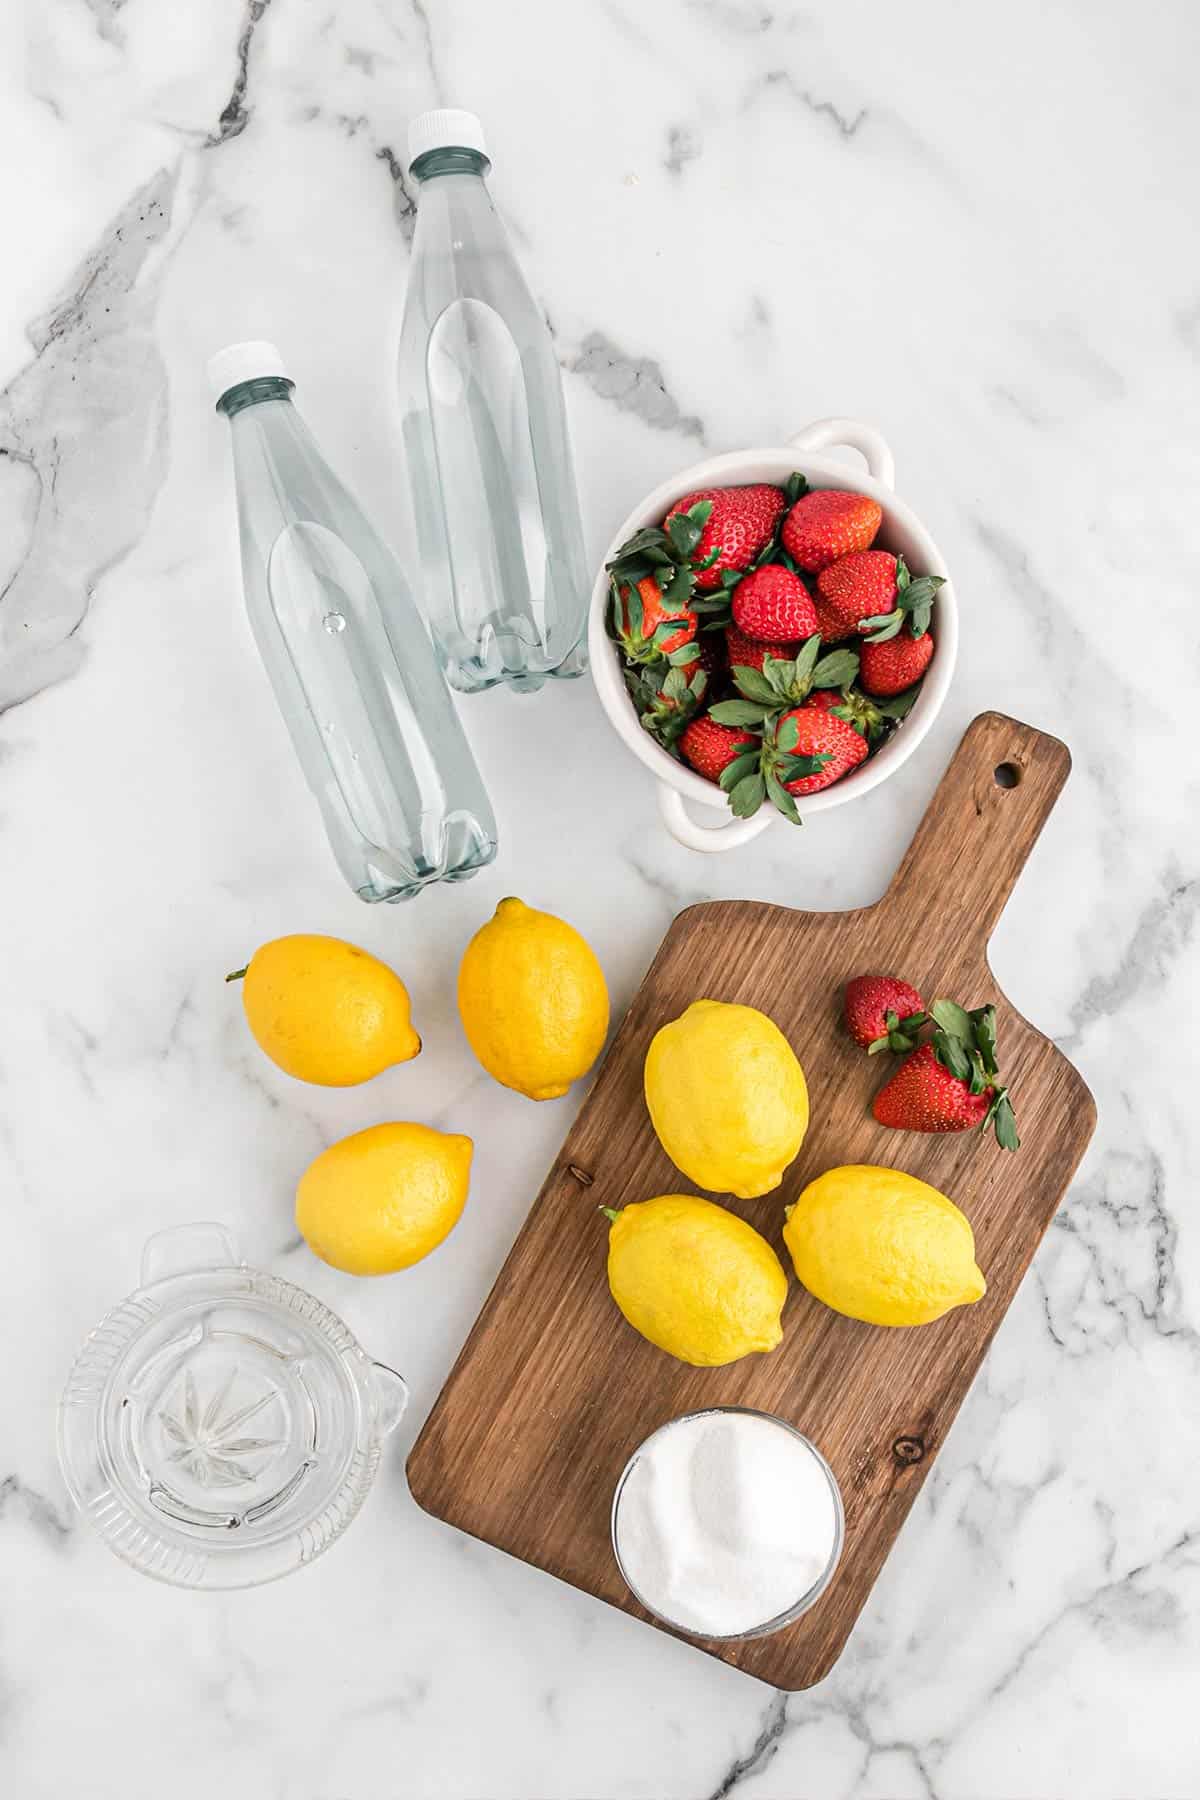 Ingredients to make homemade strawberry lemonade on the table.